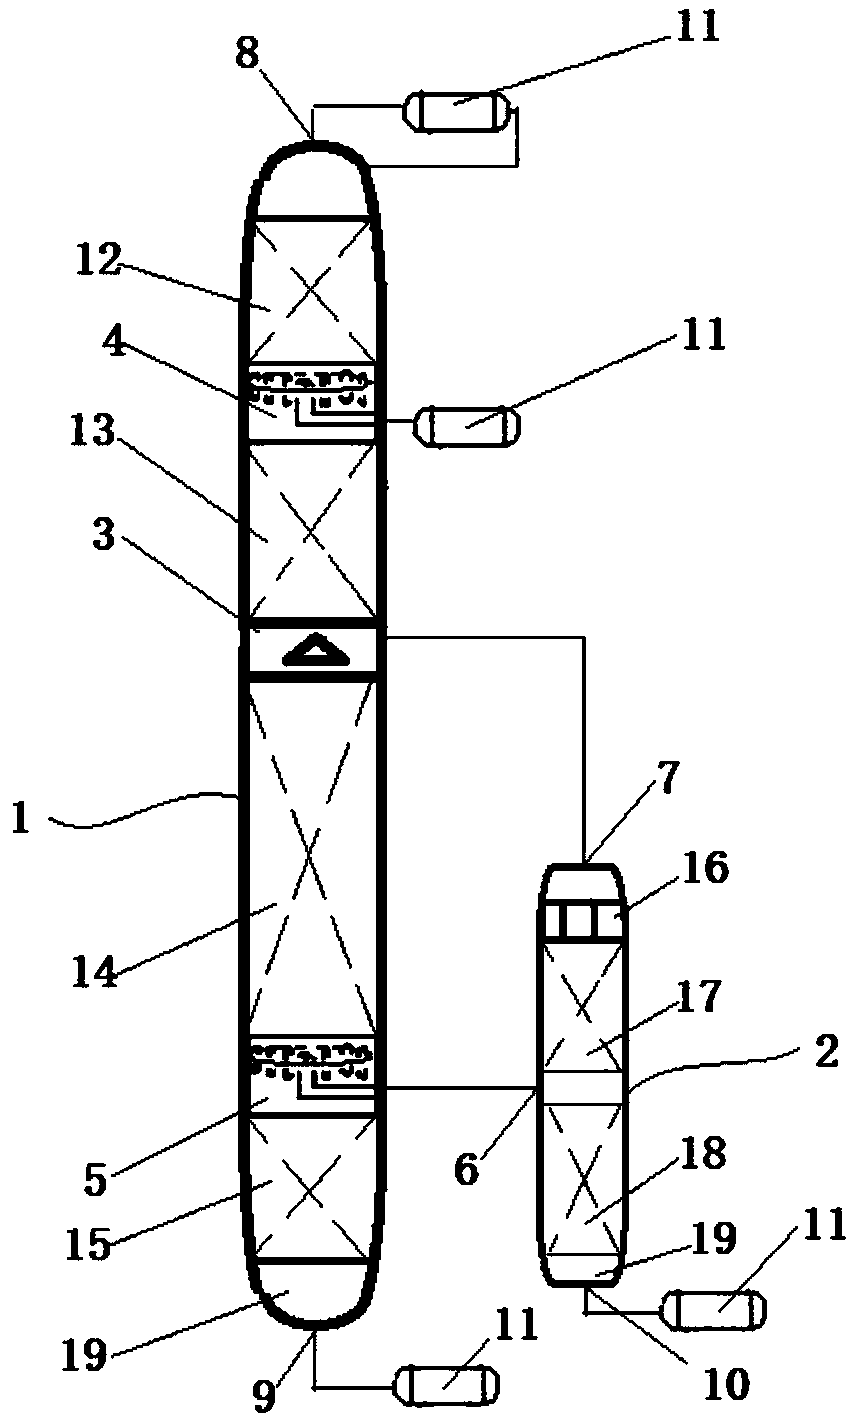 Device and method for extracting 2-naphthol methyl ether from 2-naphthol, methyl alcohol, 2-naphthol methyl ether and p-toluenesulfonic acid and recovering components